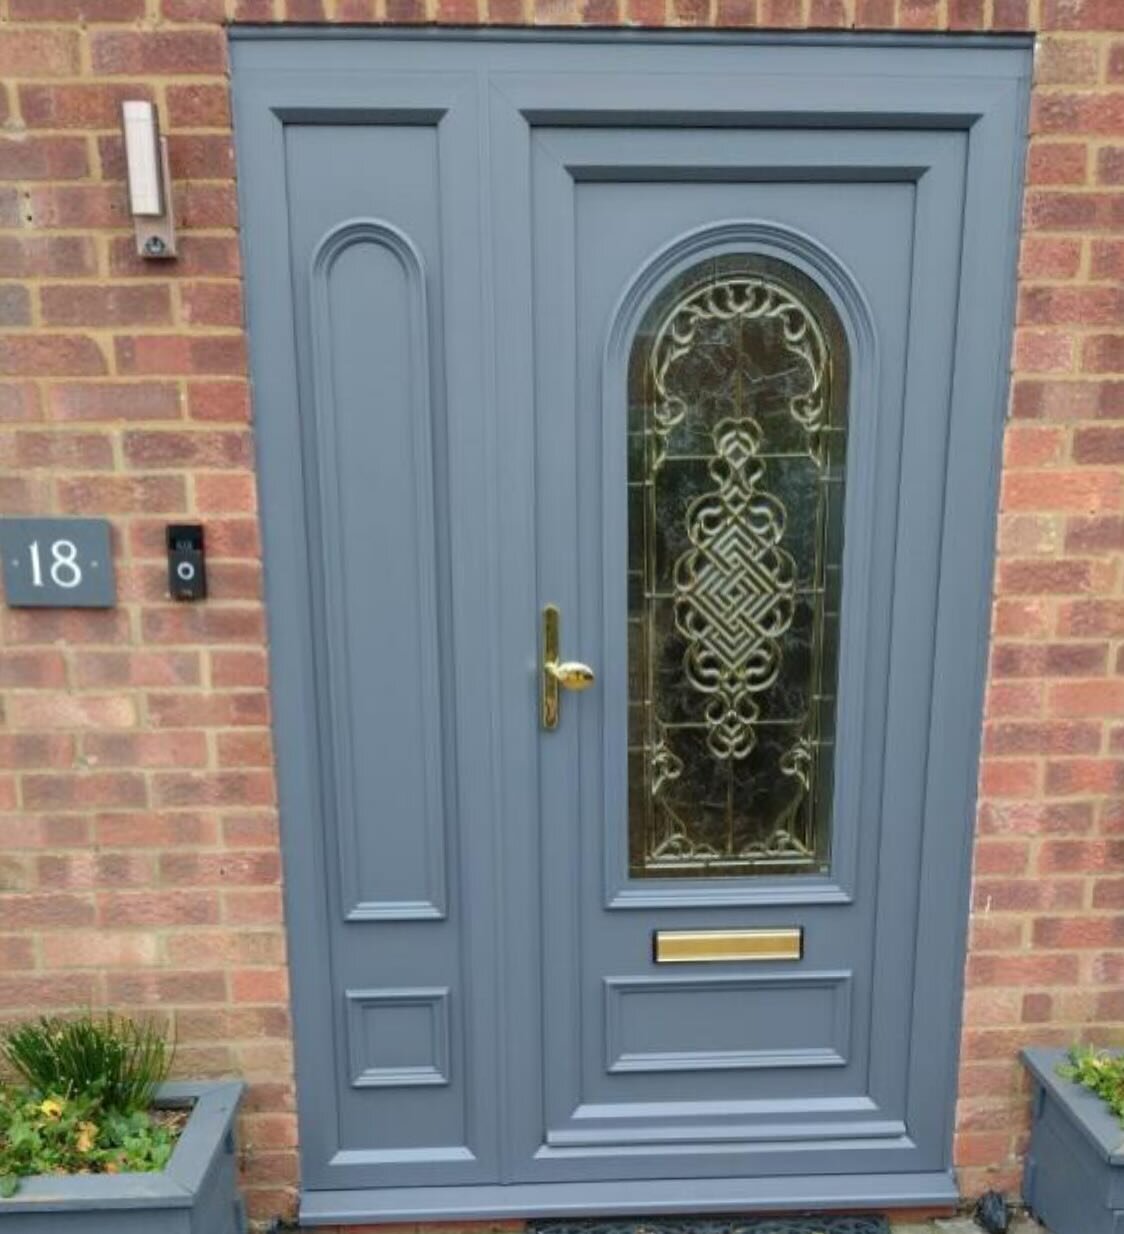 ♻️ Respraying instead of replacing your front door &amp; windows is better for the environment and your wallet! 

DM us for a quote today!

Colour: RAL 7015
#upvcspraying #spraypainters #frontdoorspraying #respray